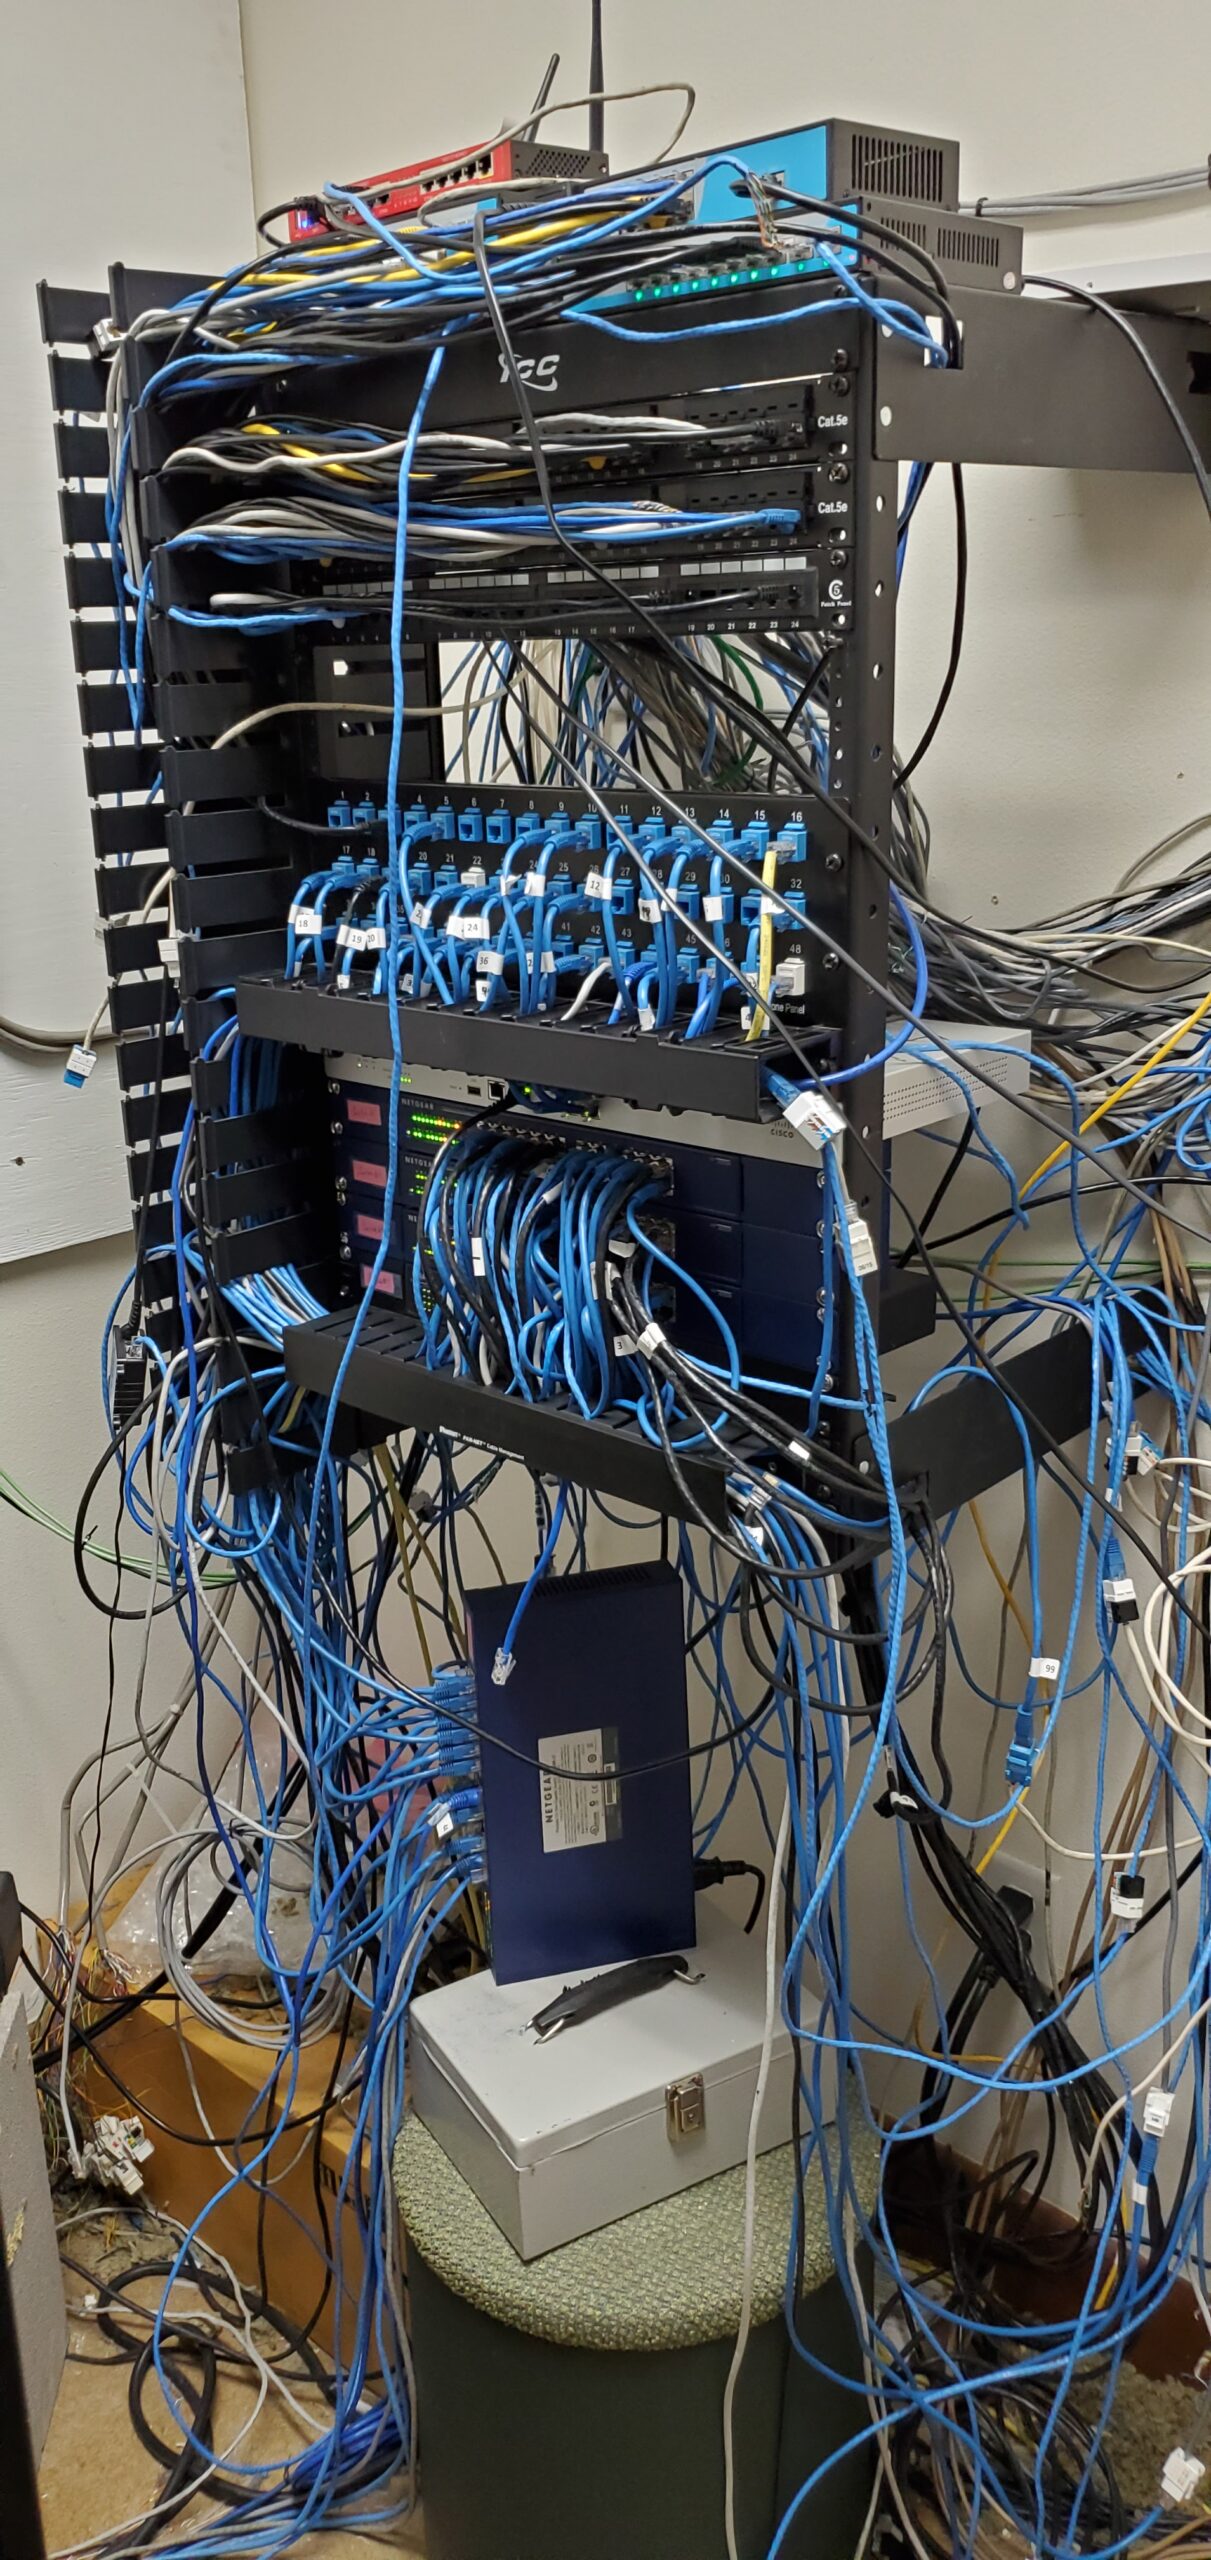 Network Cabling Services